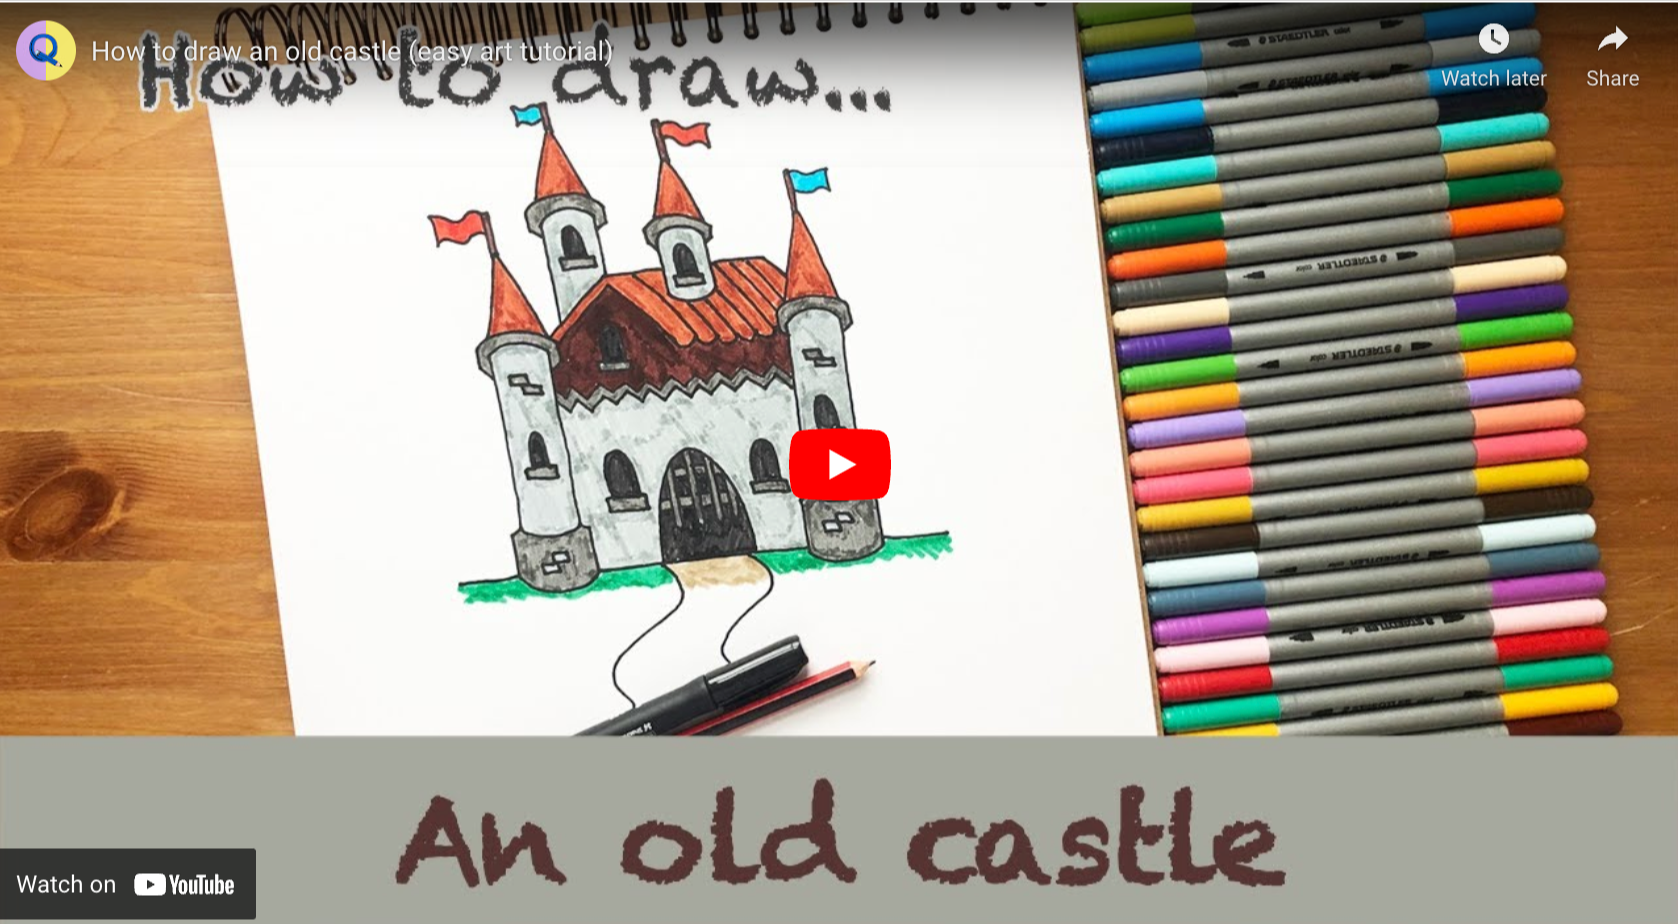 Load video: How to draw an old castle video